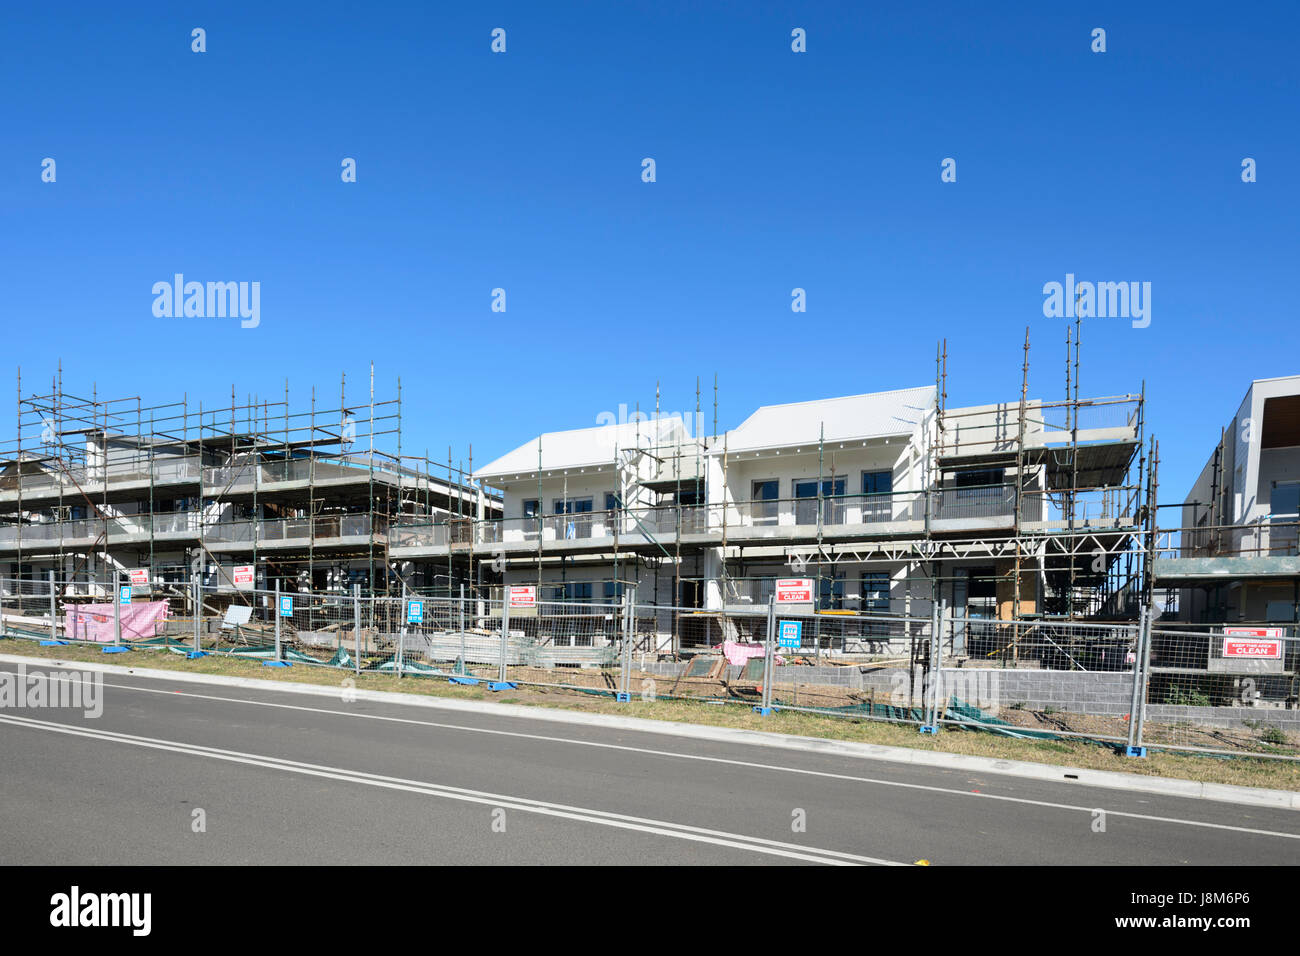 A row of new houses being built, Shell Cove, New South Wales, NSW, Australia Stock Photo